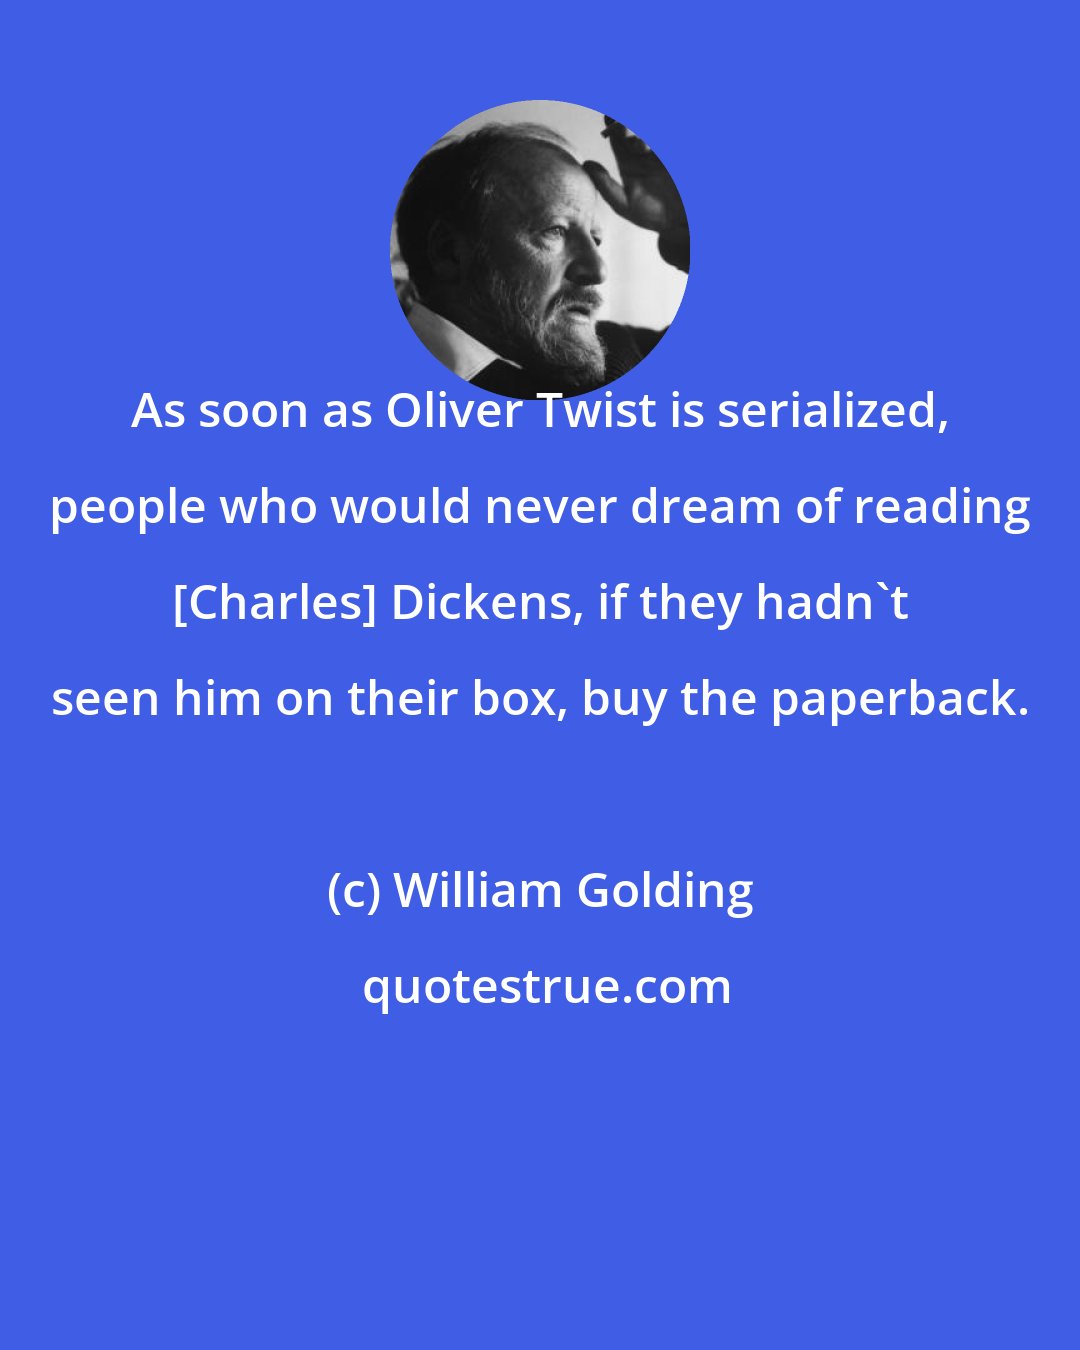 William Golding: As soon as Oliver Twist is serialized, people who would never dream of reading [Charles] Dickens, if they hadn't seen him on their box, buy the paperback.